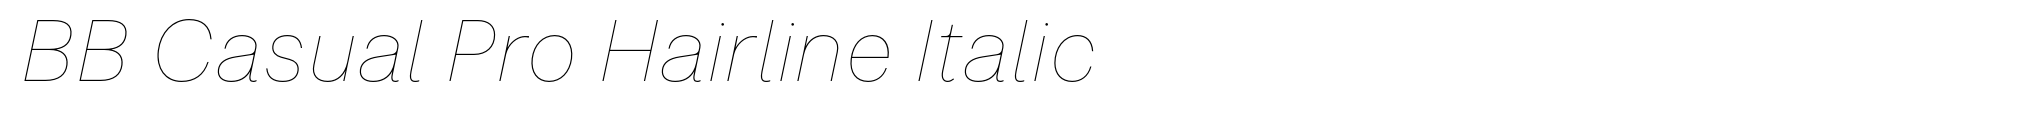 BB Casual Pro Hairline Italic image